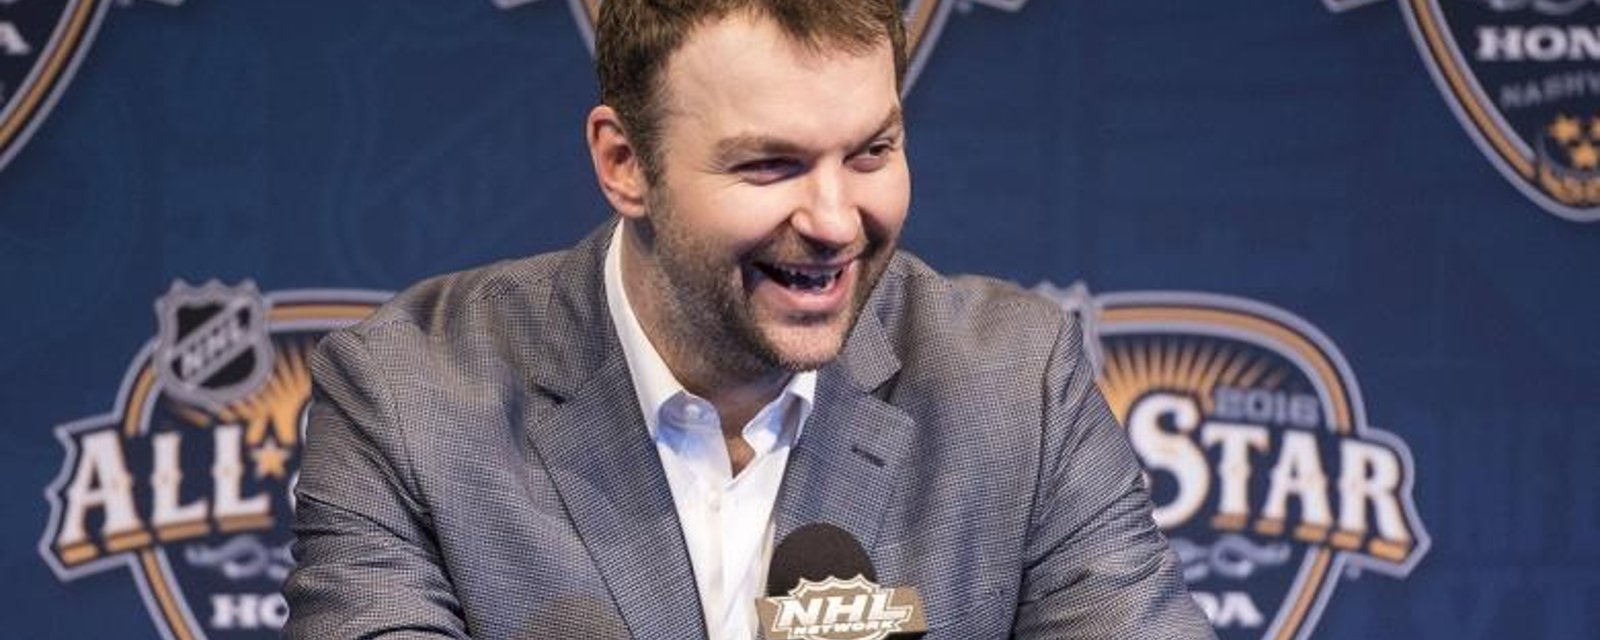 Breaking: John Scott says he has not been paid by the NHL.